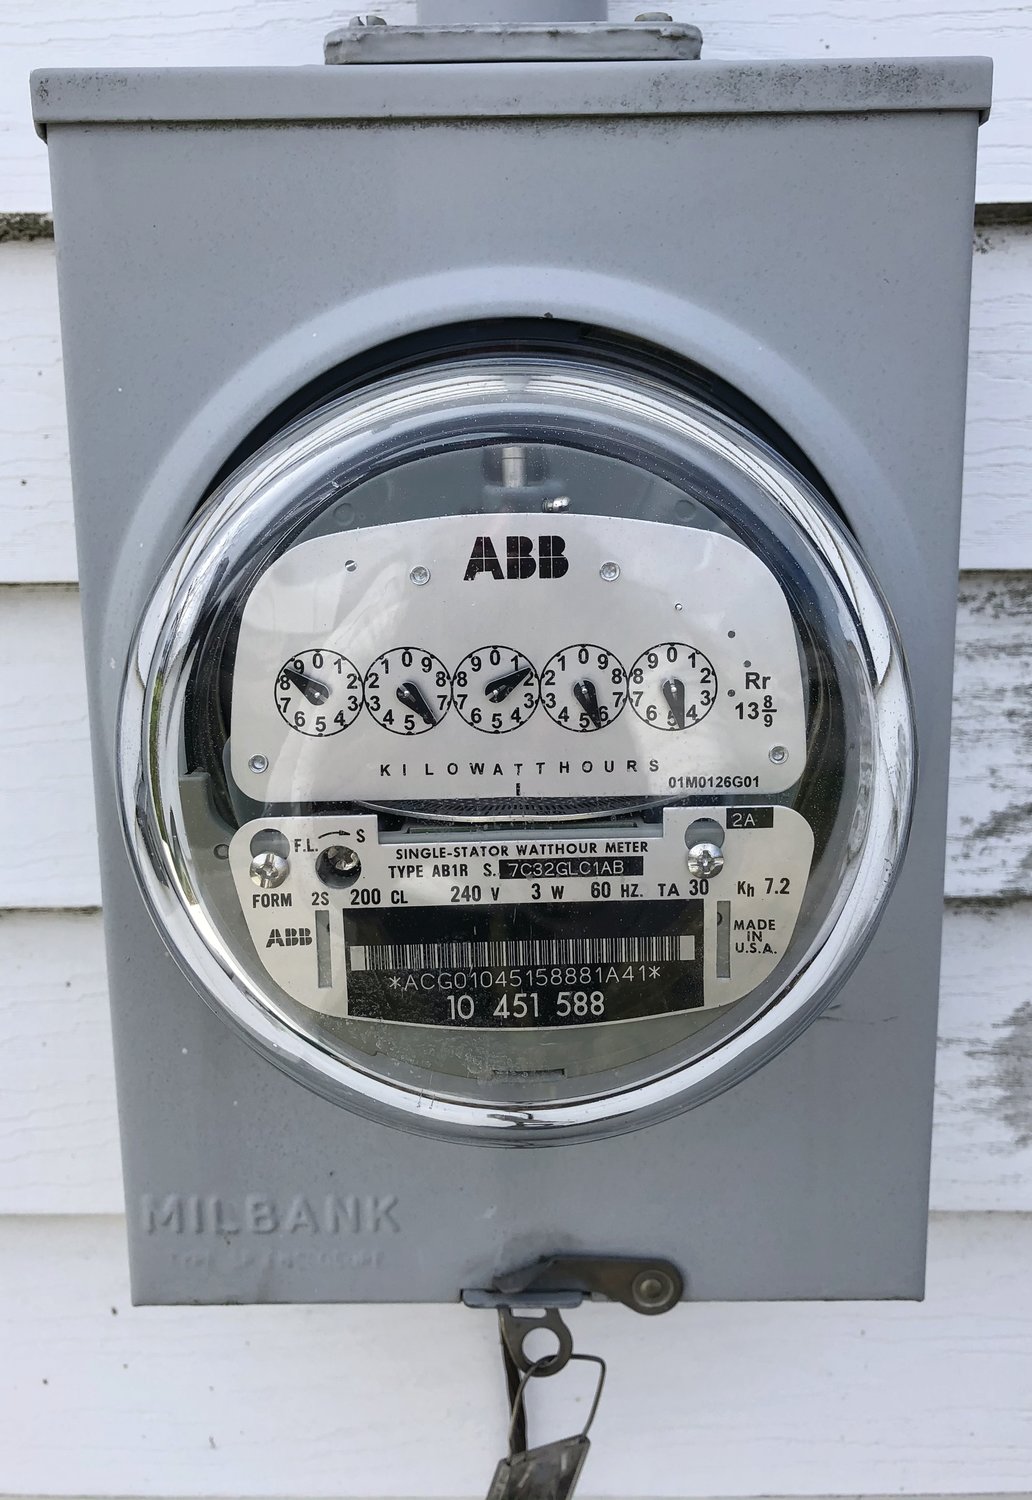 Rhode Island's aging meters are nearing obsolescence. It may cost ratepayers $200 million to replace the Ocean State's more than 525,000 electric meters.